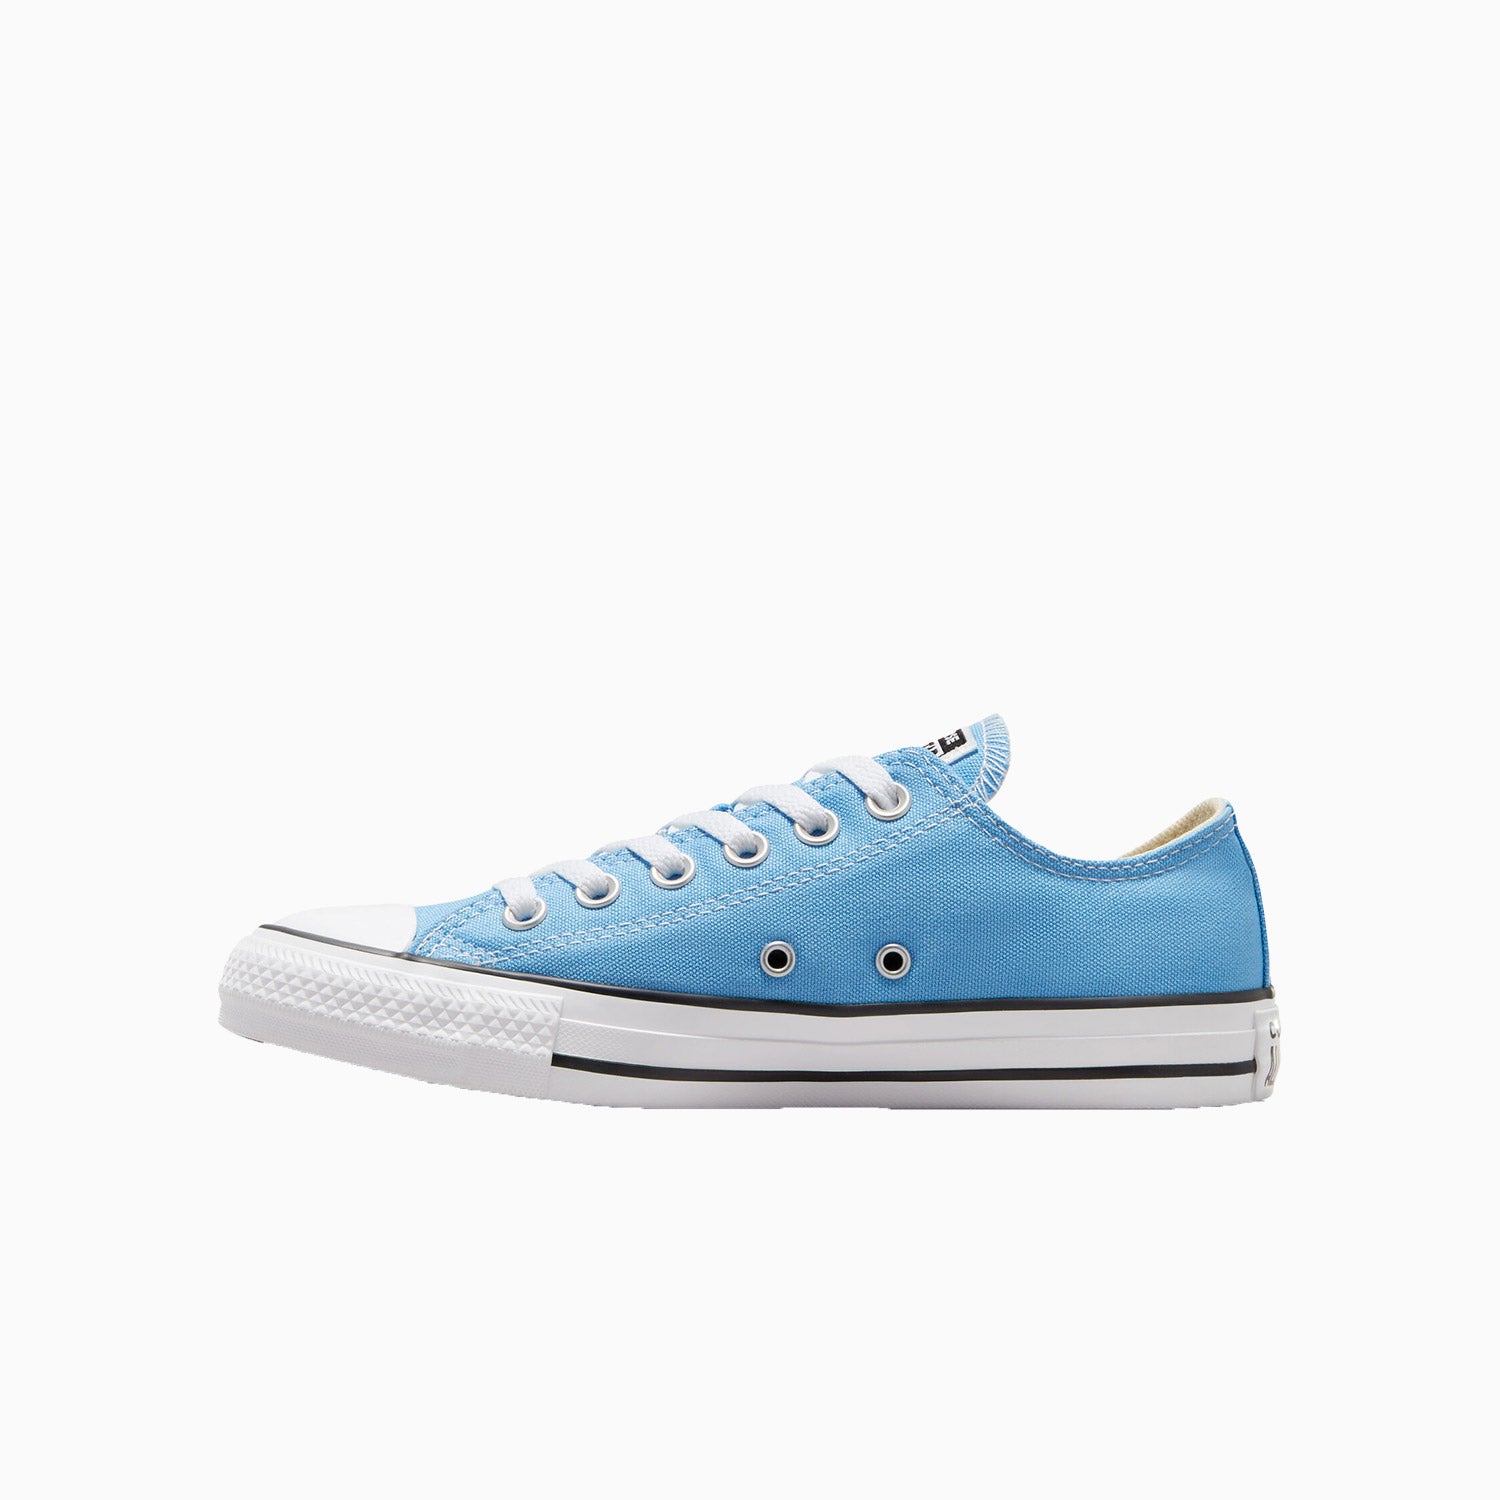 converse-chuck-taylor-all-star-ox-shoes-a04545f